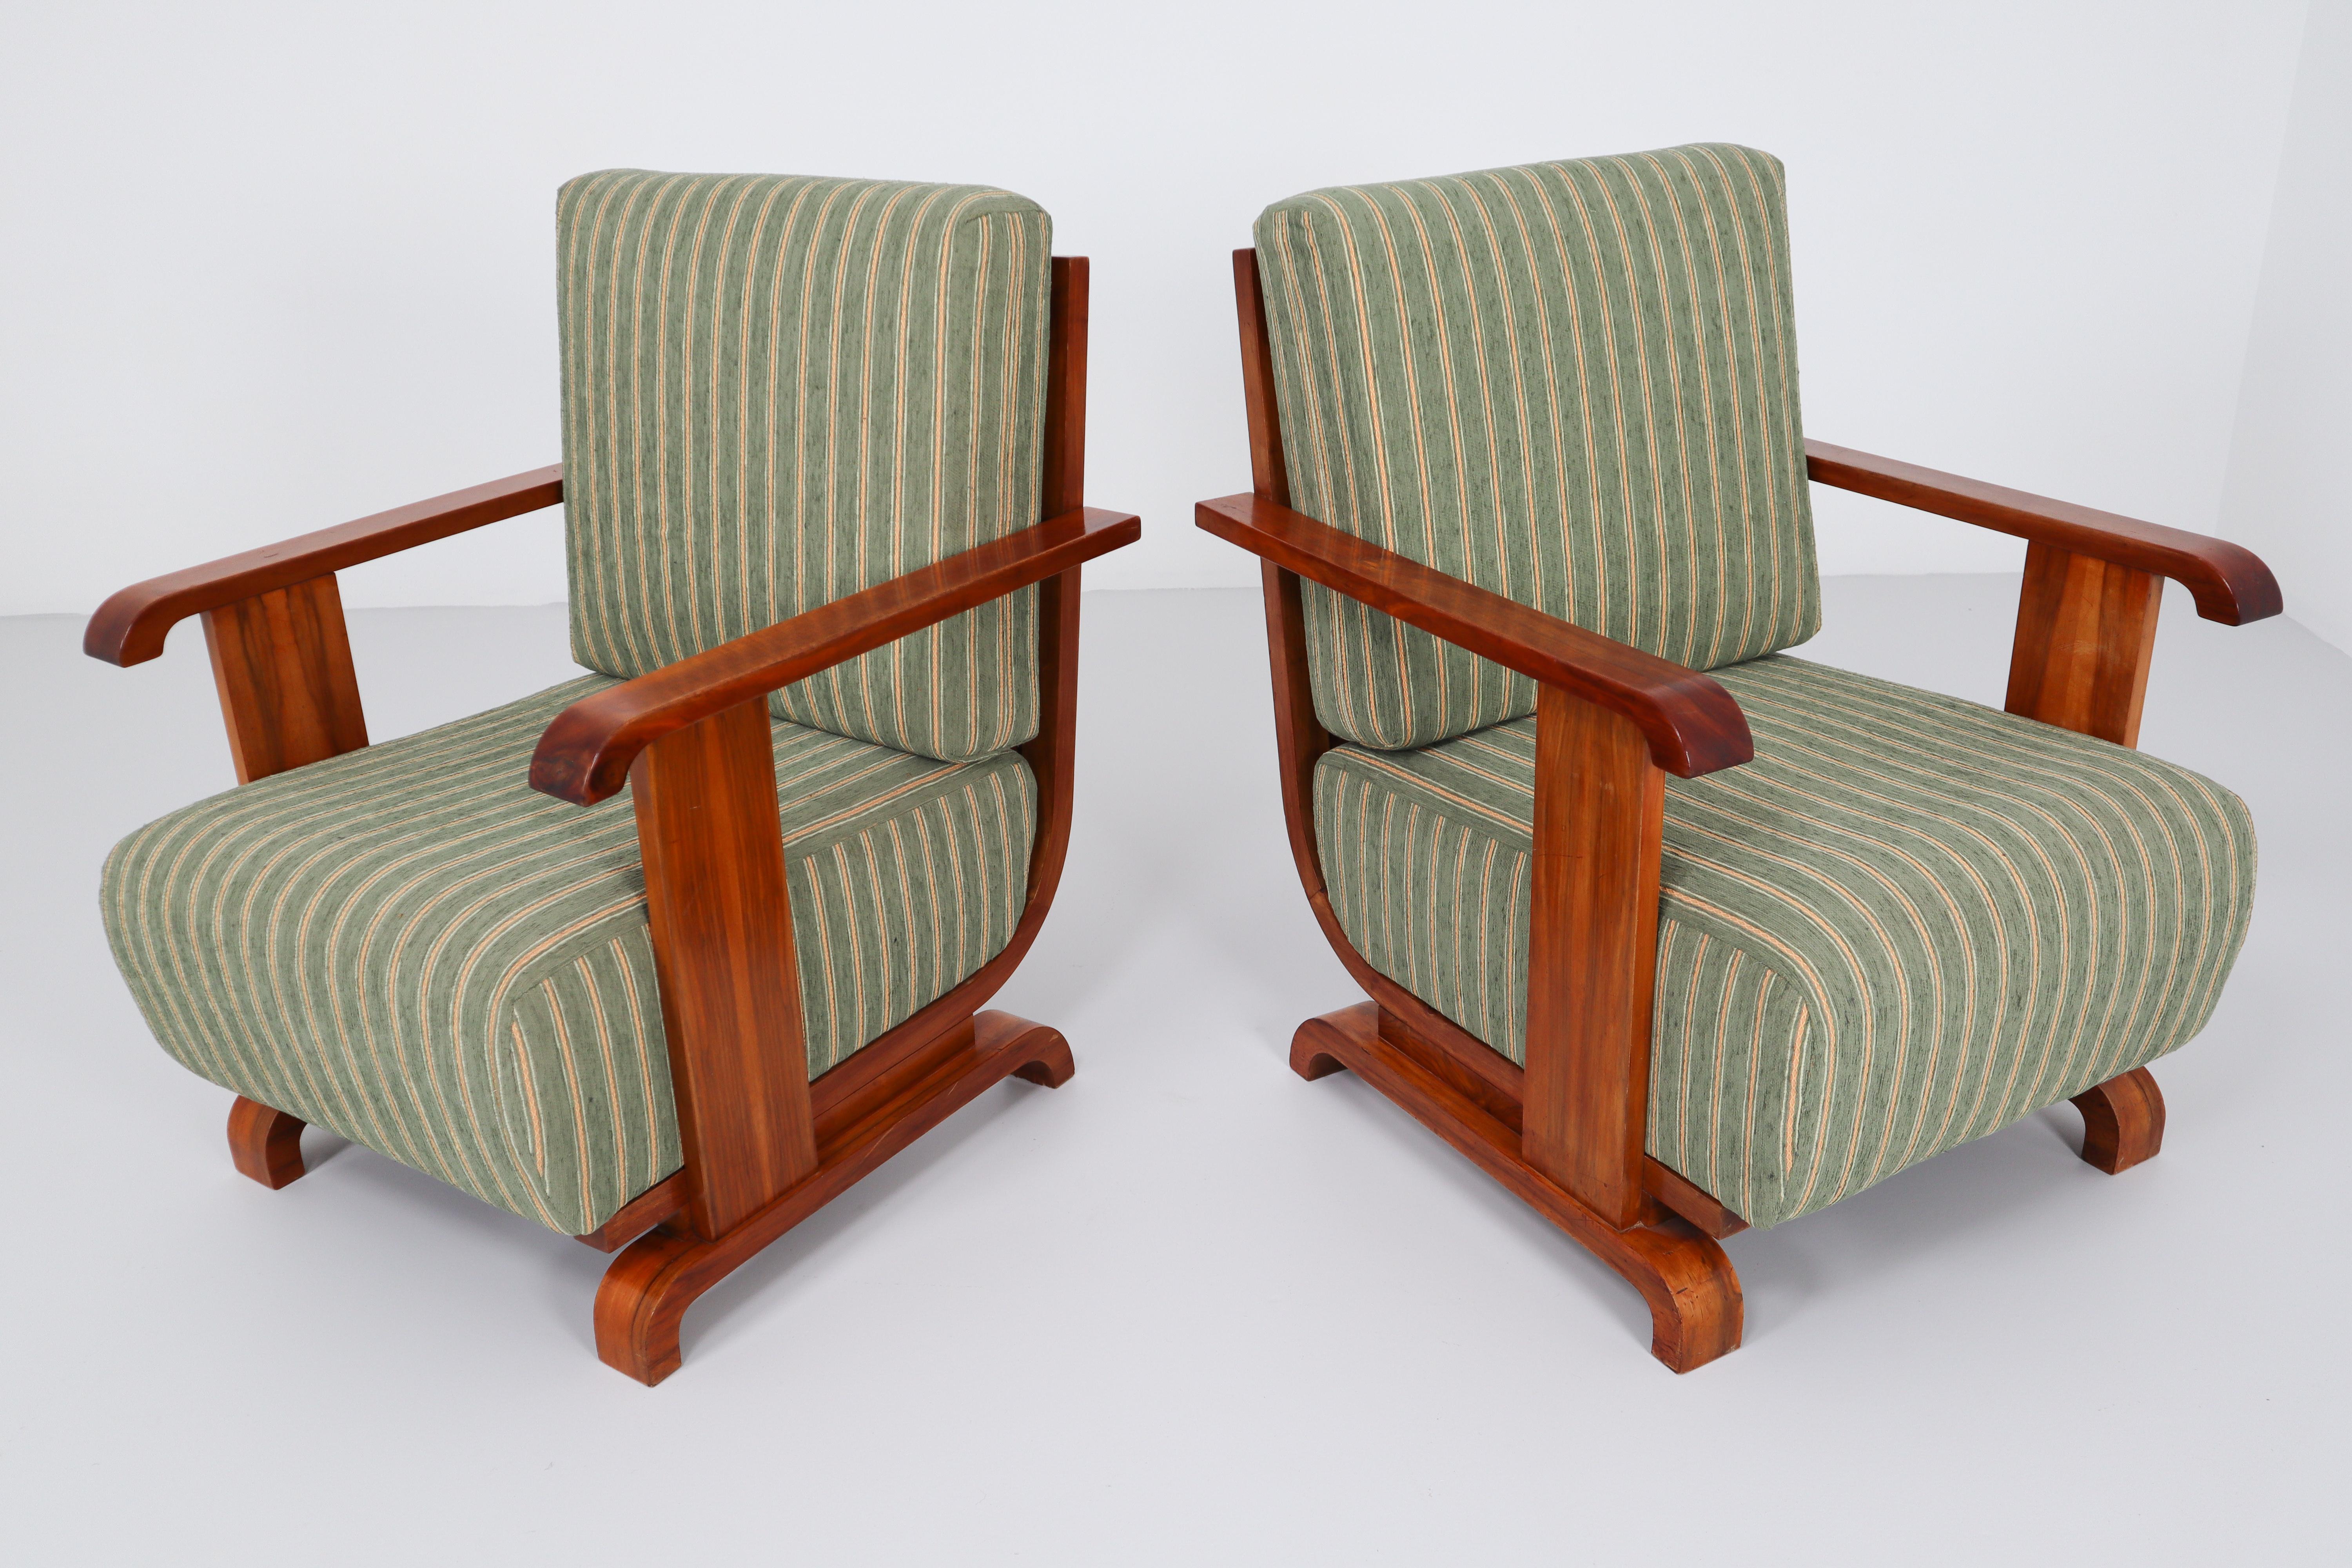 A pair of Art Deco Austrian armchairs from Vienna, reupholstered in a new olive green velvet blend. The frame and arms are made of a beautiful walnut. We couldn’t resist the comfort and impeccable lines of these.